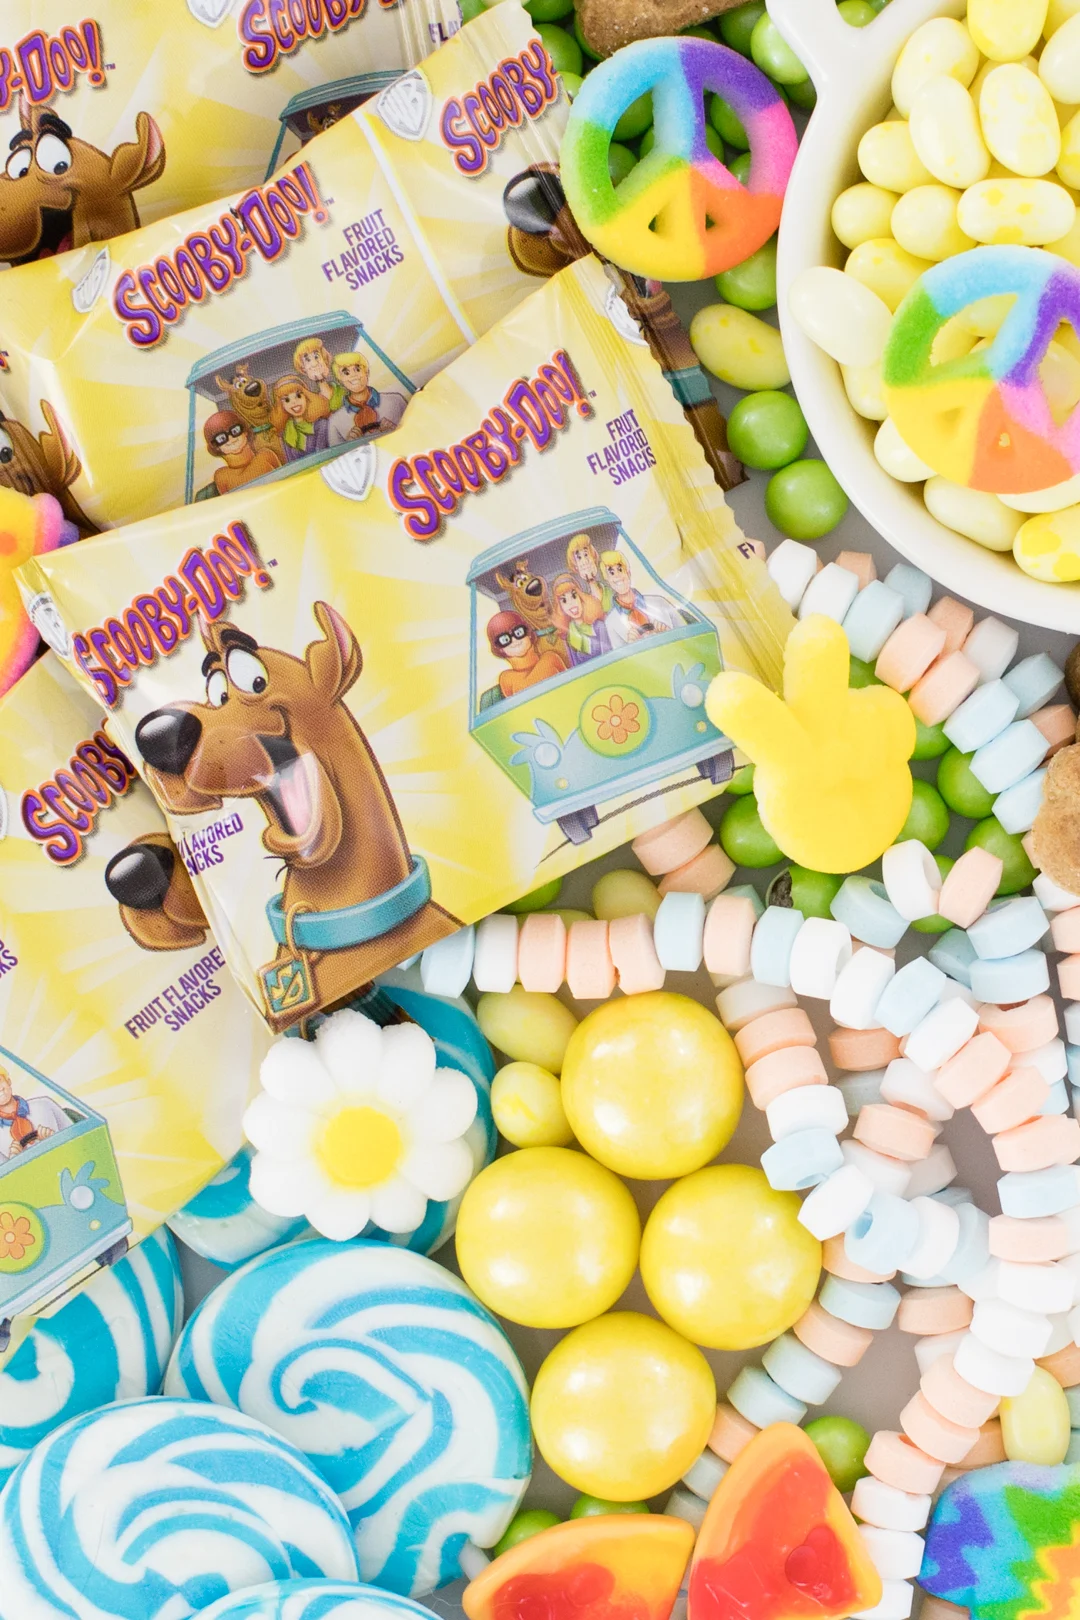 Scooby Fruit Snacks Packages and peace sign candy